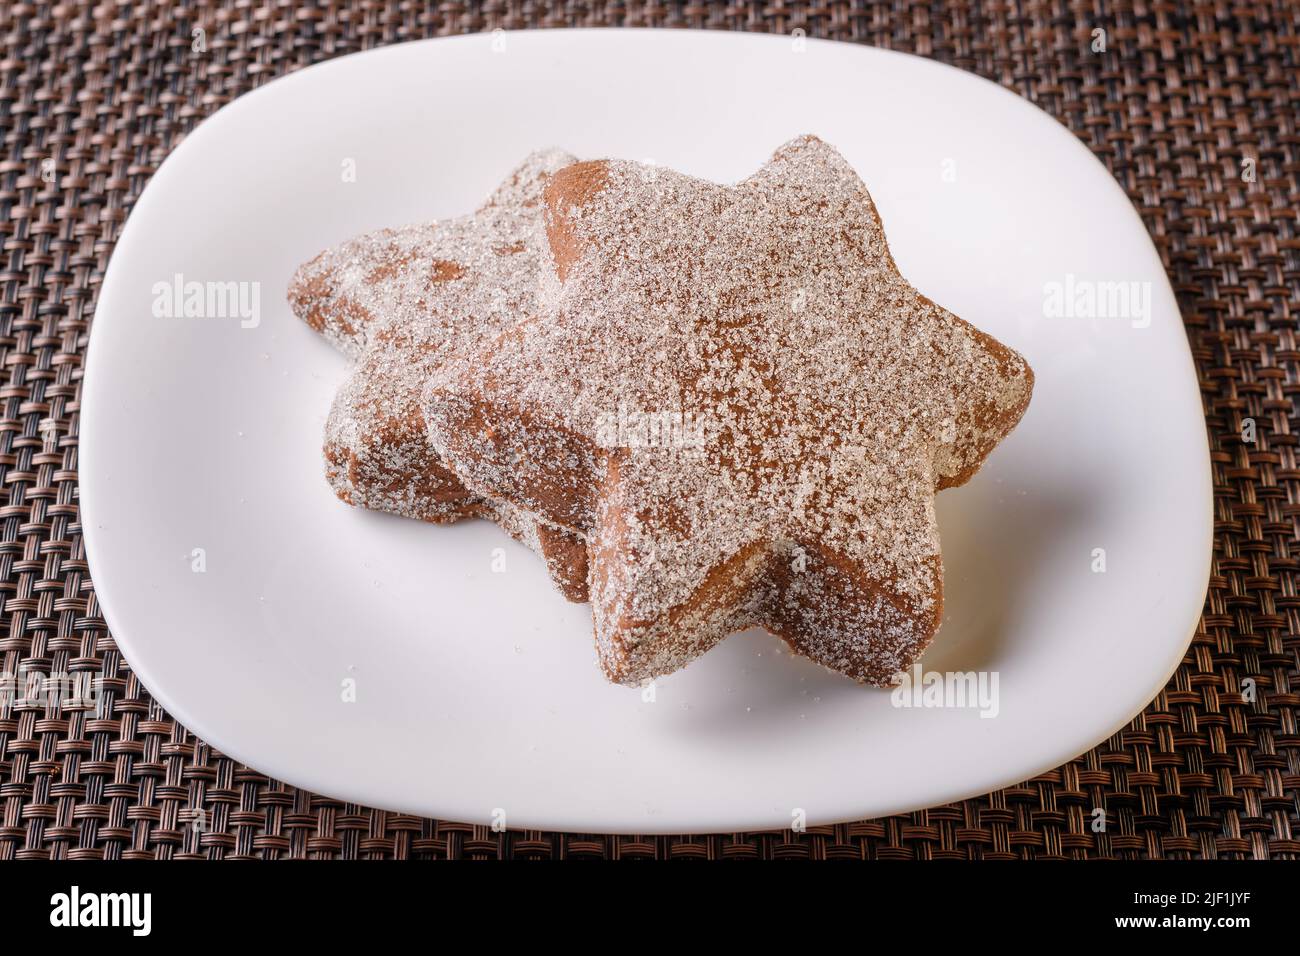 delicious chocolate flavor cookie sprinkled with sugar late night snack placed on a white plate homemade Stock Photo